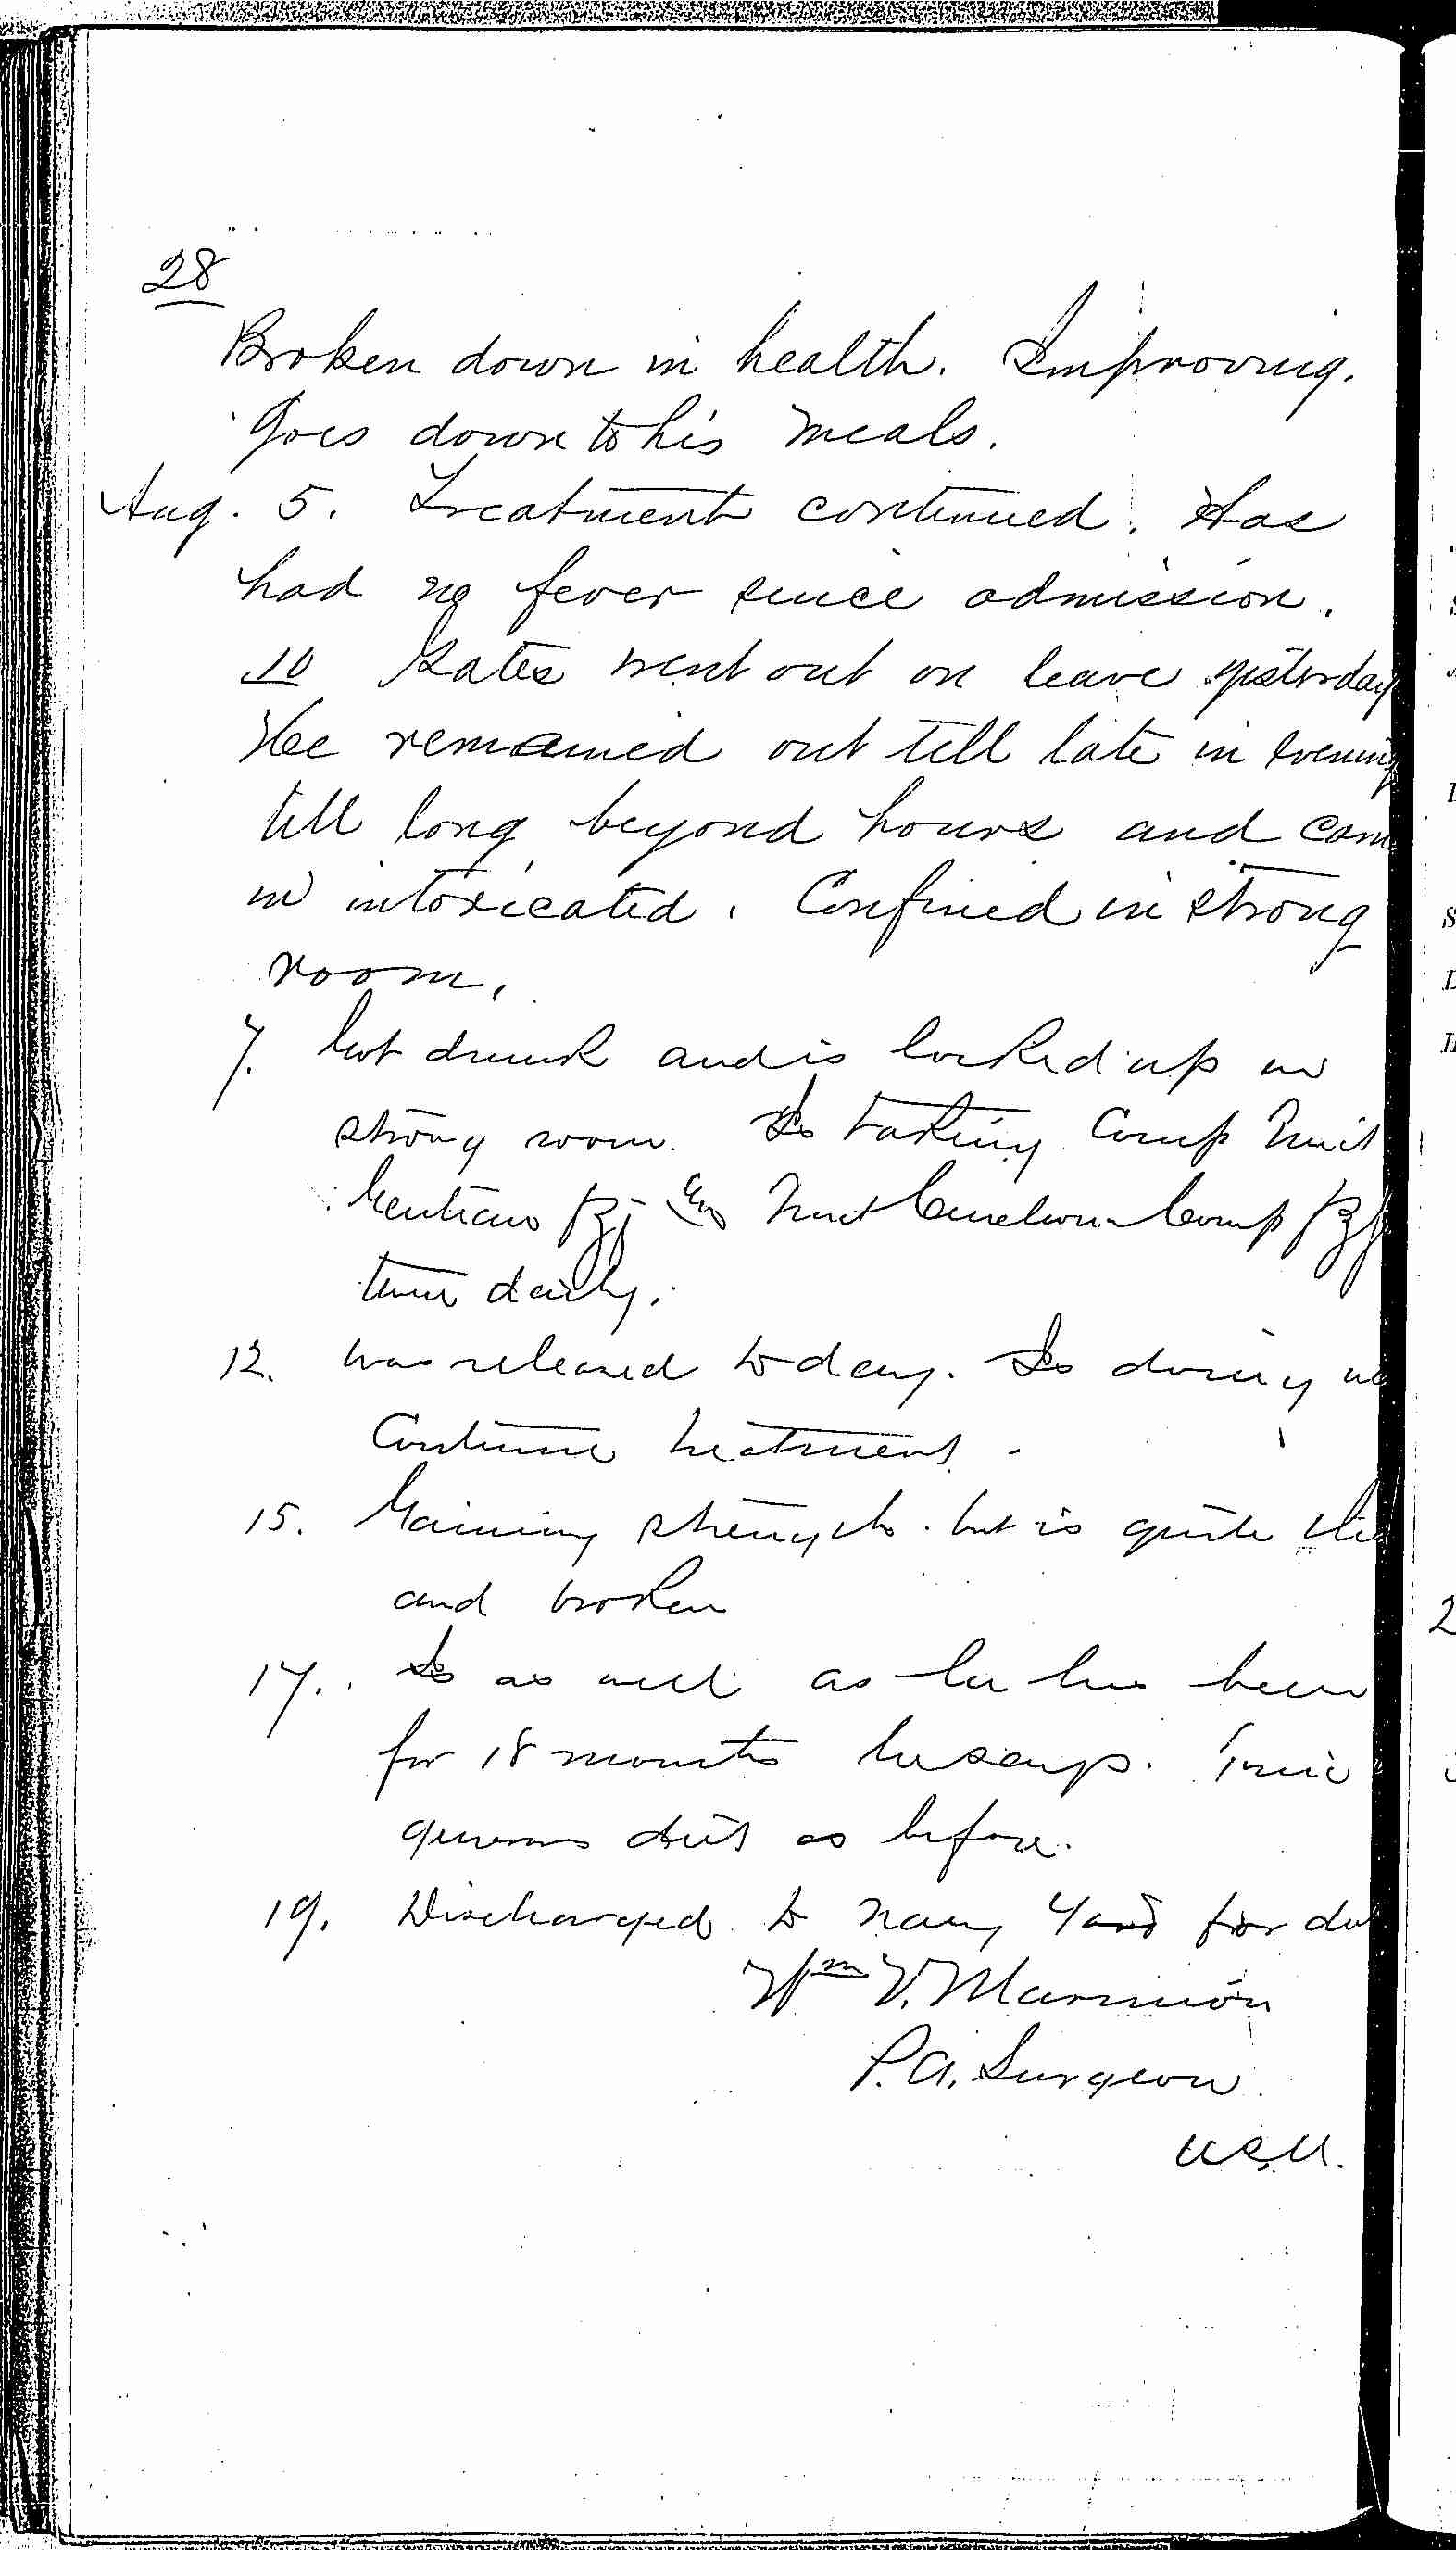 Entry for George Gates (page 2 of 2) in the log Hospital Tickets and Case Papers - Naval Hospital - Washington, D.C. - 1868-69